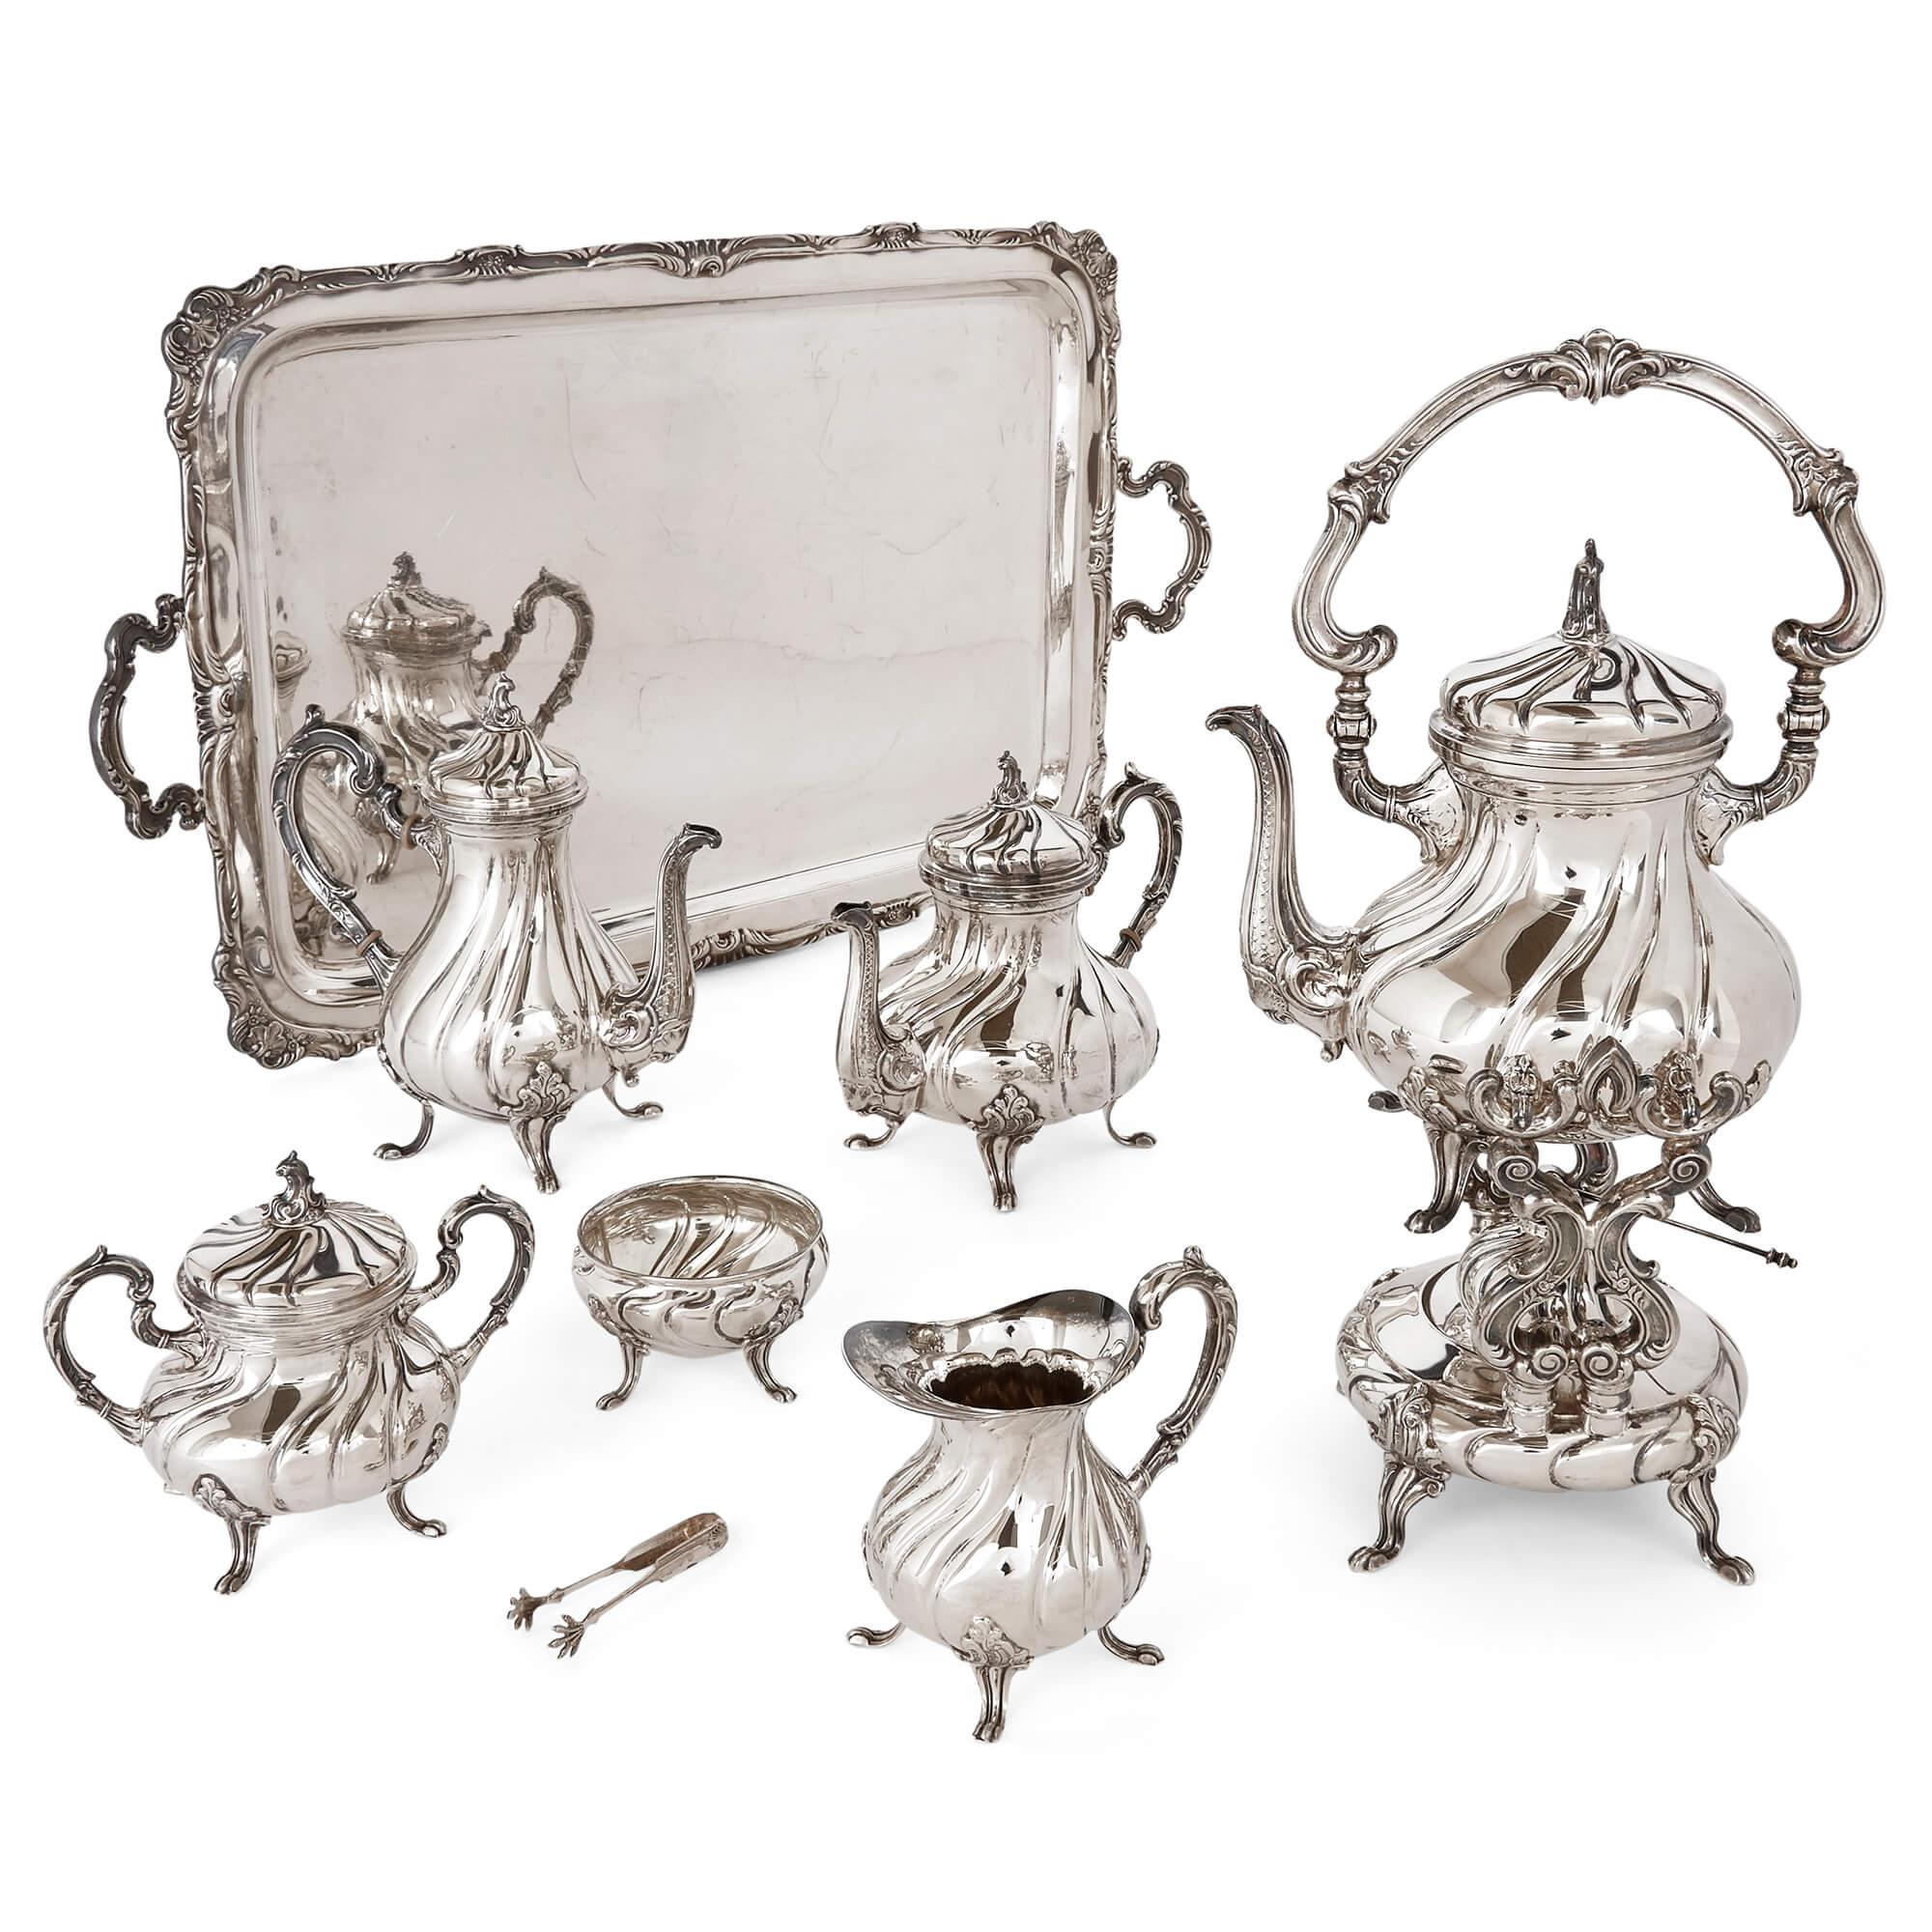 20th century Peruvian silver tea and coffee set by Camusso 
Peru, Early 20th Century 
Tray: Height 5cm, width 78cm, depth 45cm
Teapot on stand: Height 48cm, width 23cm, depth 21cm

Beautifully designed and made, this sterling silver eight-piece